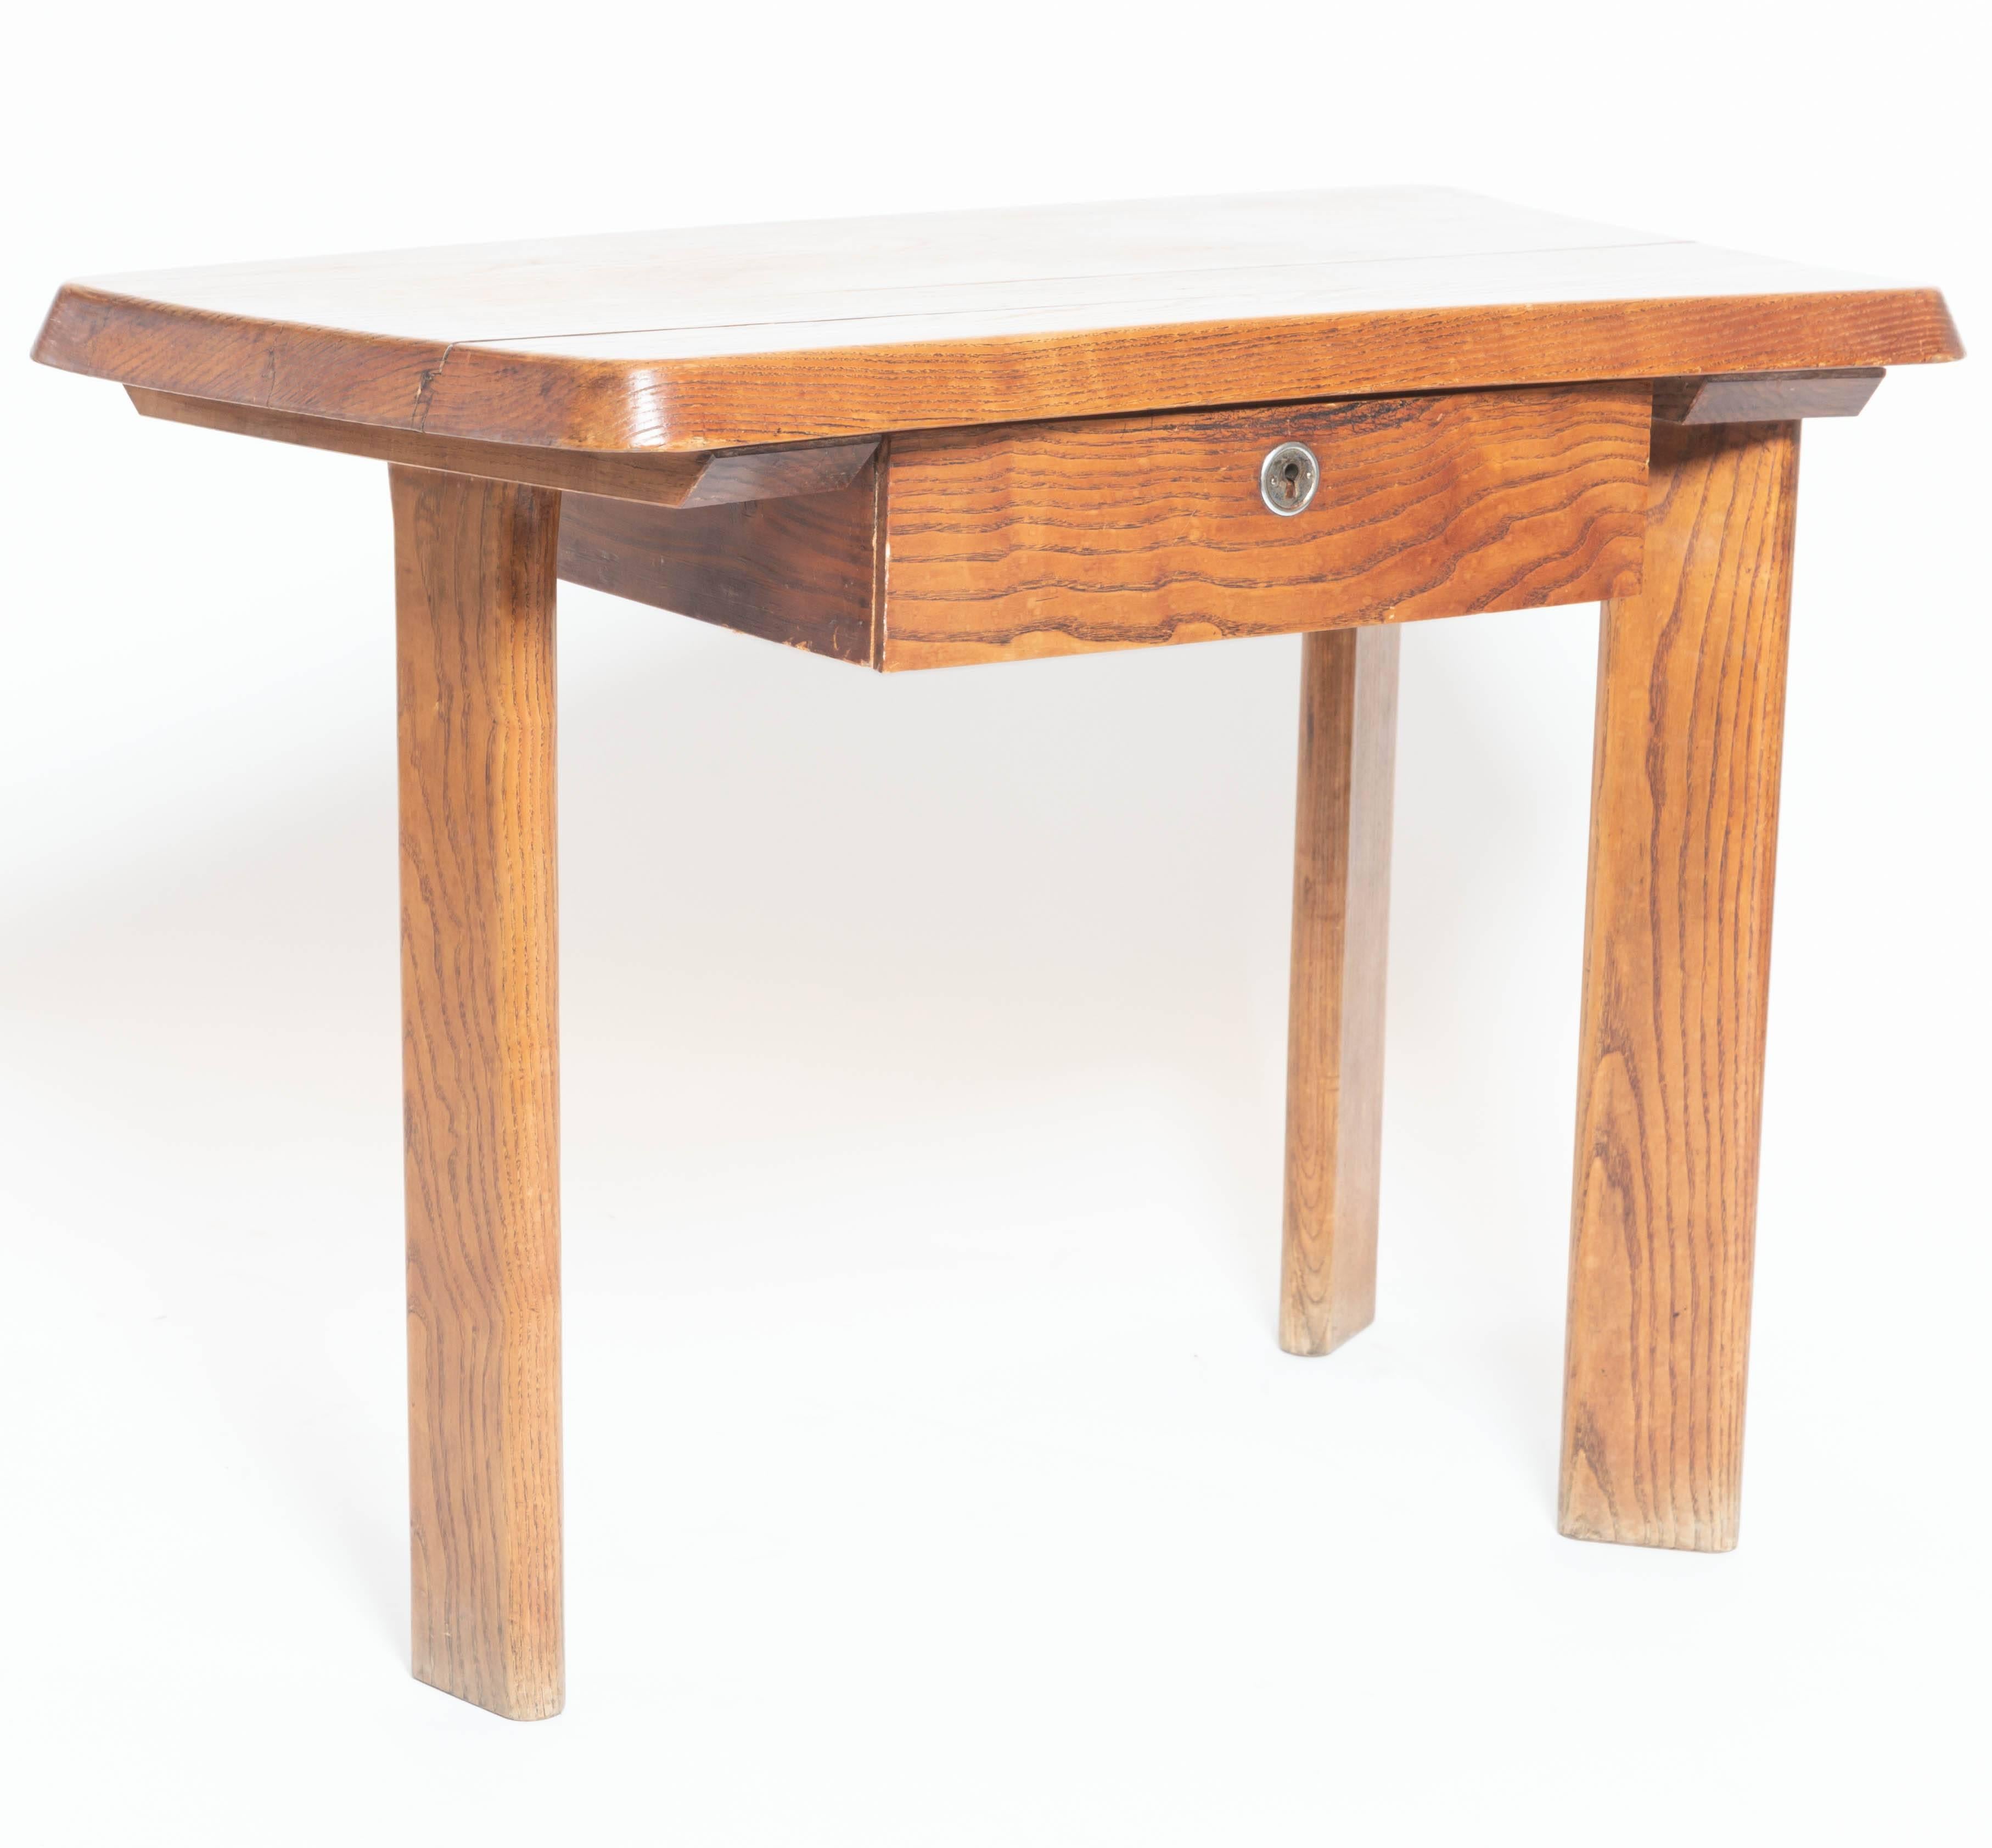 Three-Legged Wooden Oak Table with Drawer, in the Manner of Charlotte Perriand 3